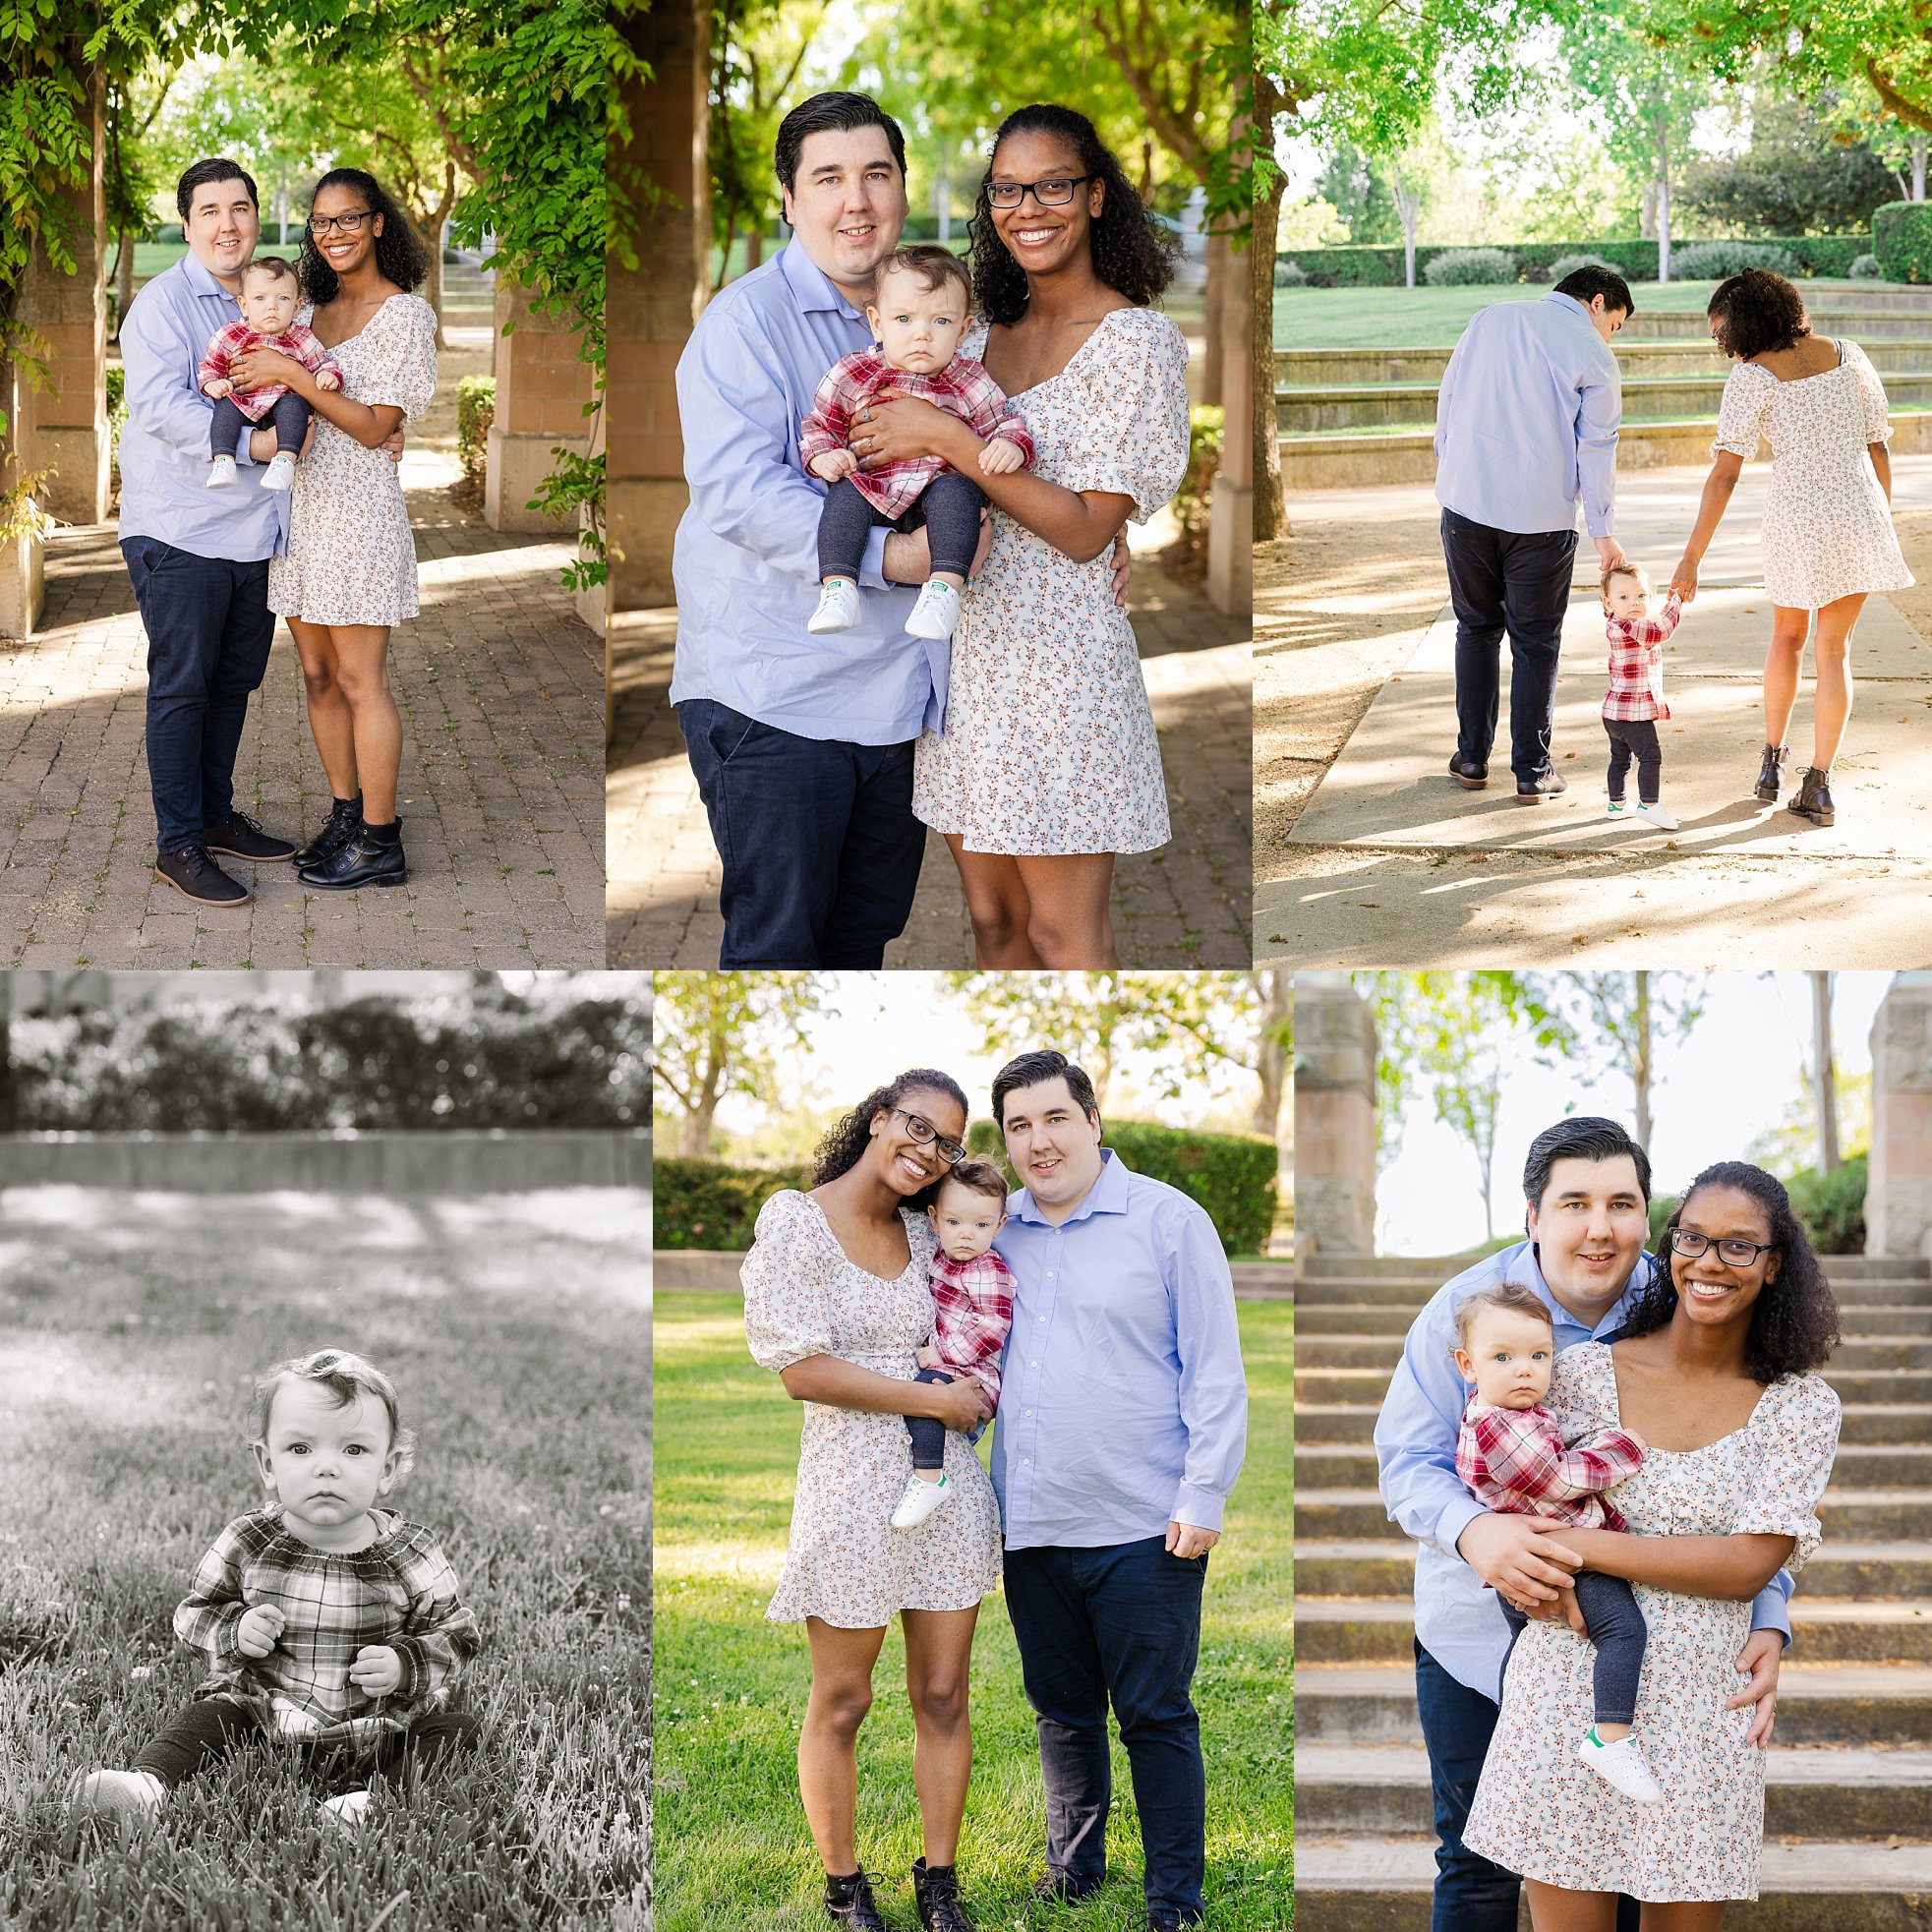 Capturing Love and Milestones: A Heartwarming Family Session at Laguna Town Hall

We had the most heartwarming family session this past Sunday evening with an absolutely adorable family. Raina, James, and little Sophia were an absolute joy to work wi